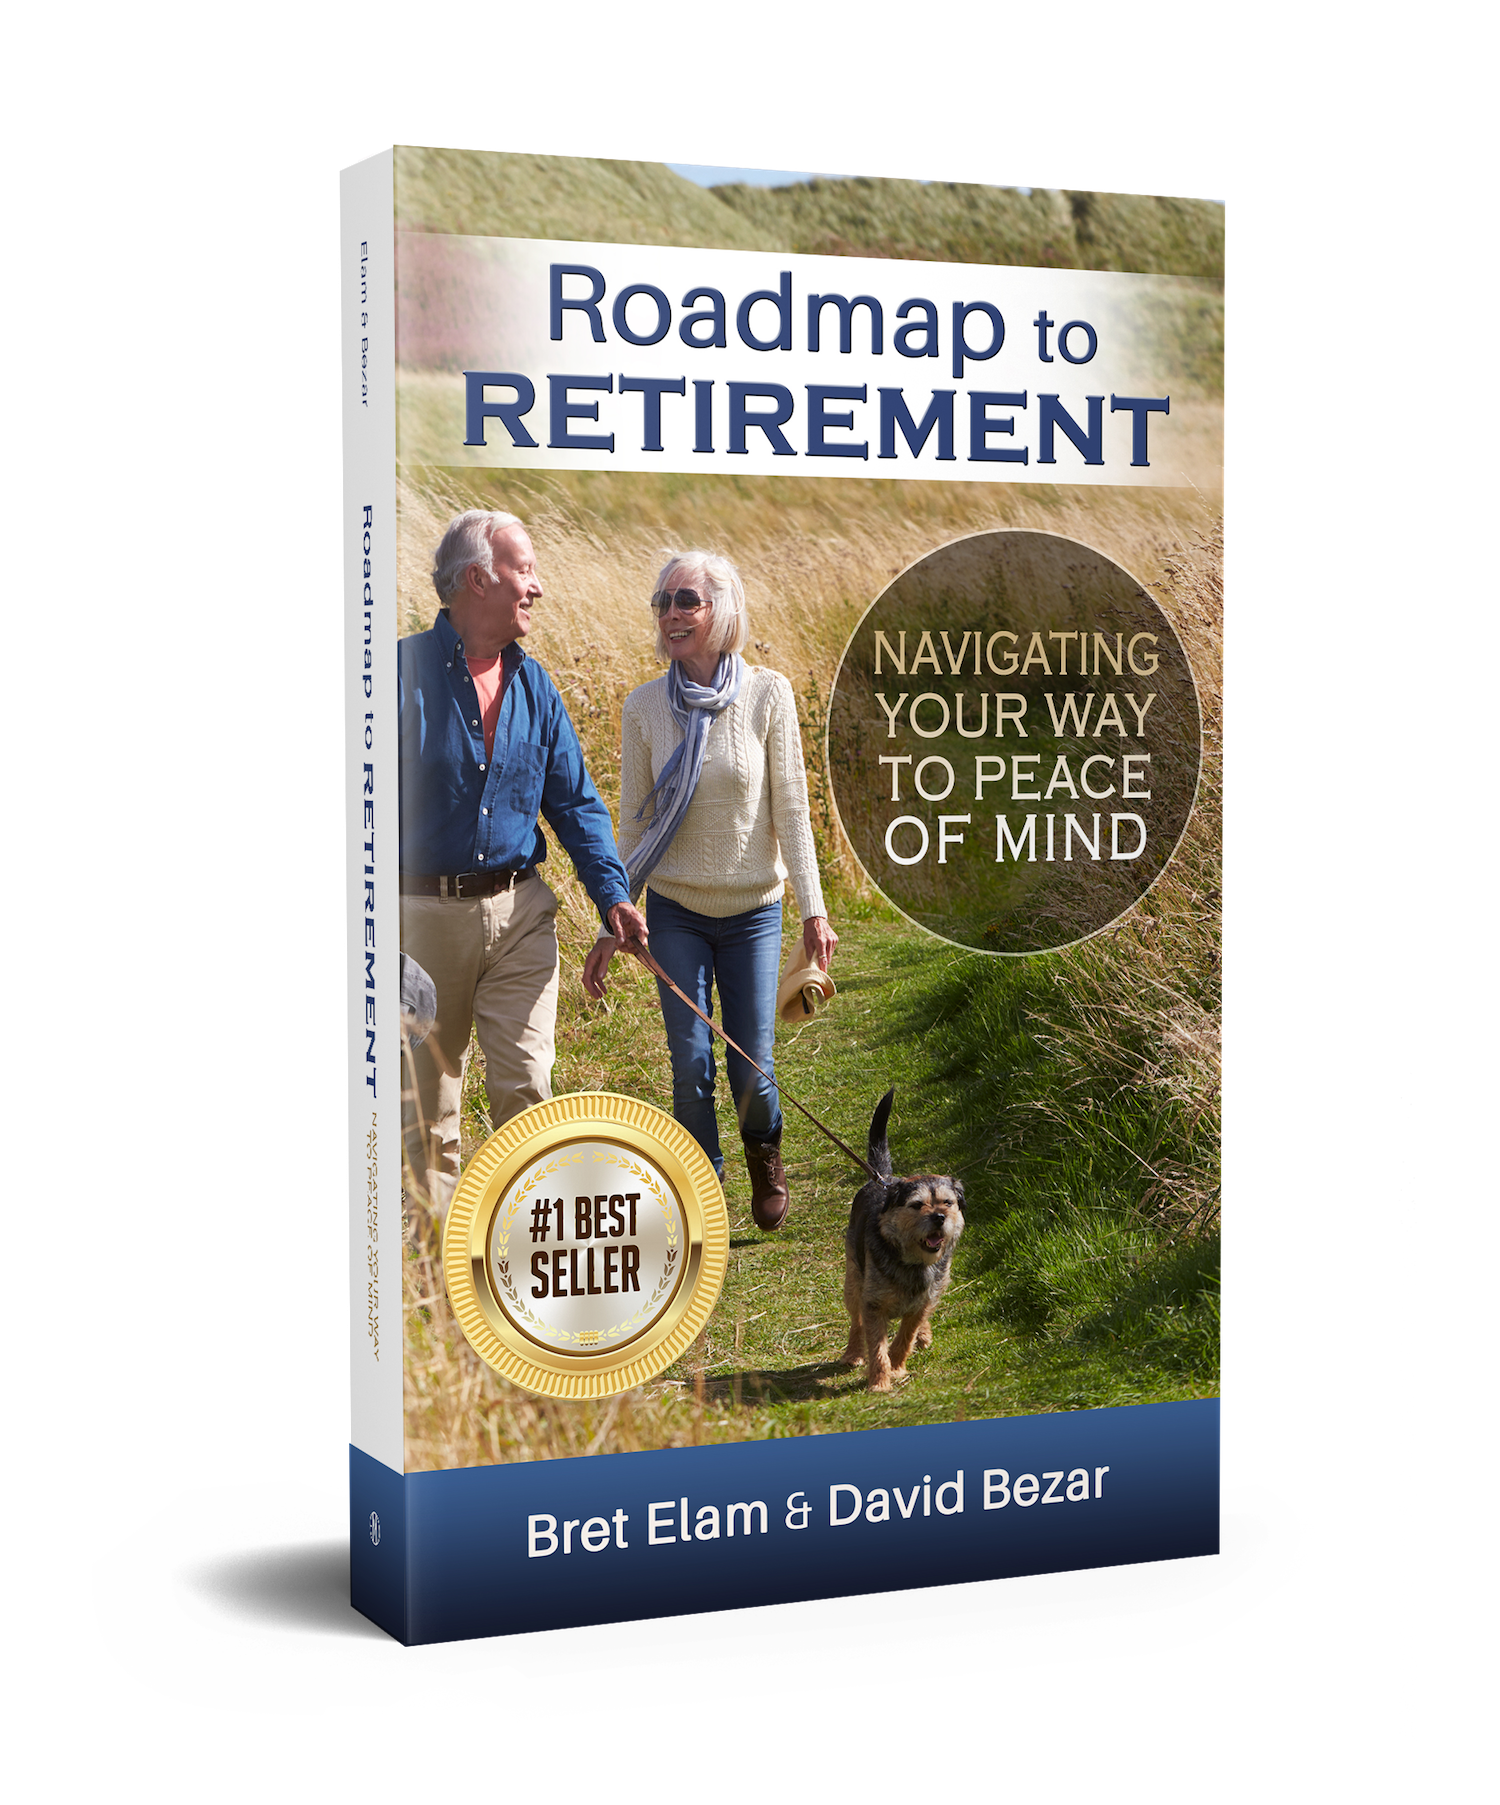 New Book “roadmap To Retirement” By David Bezar Becomes Best Seller And